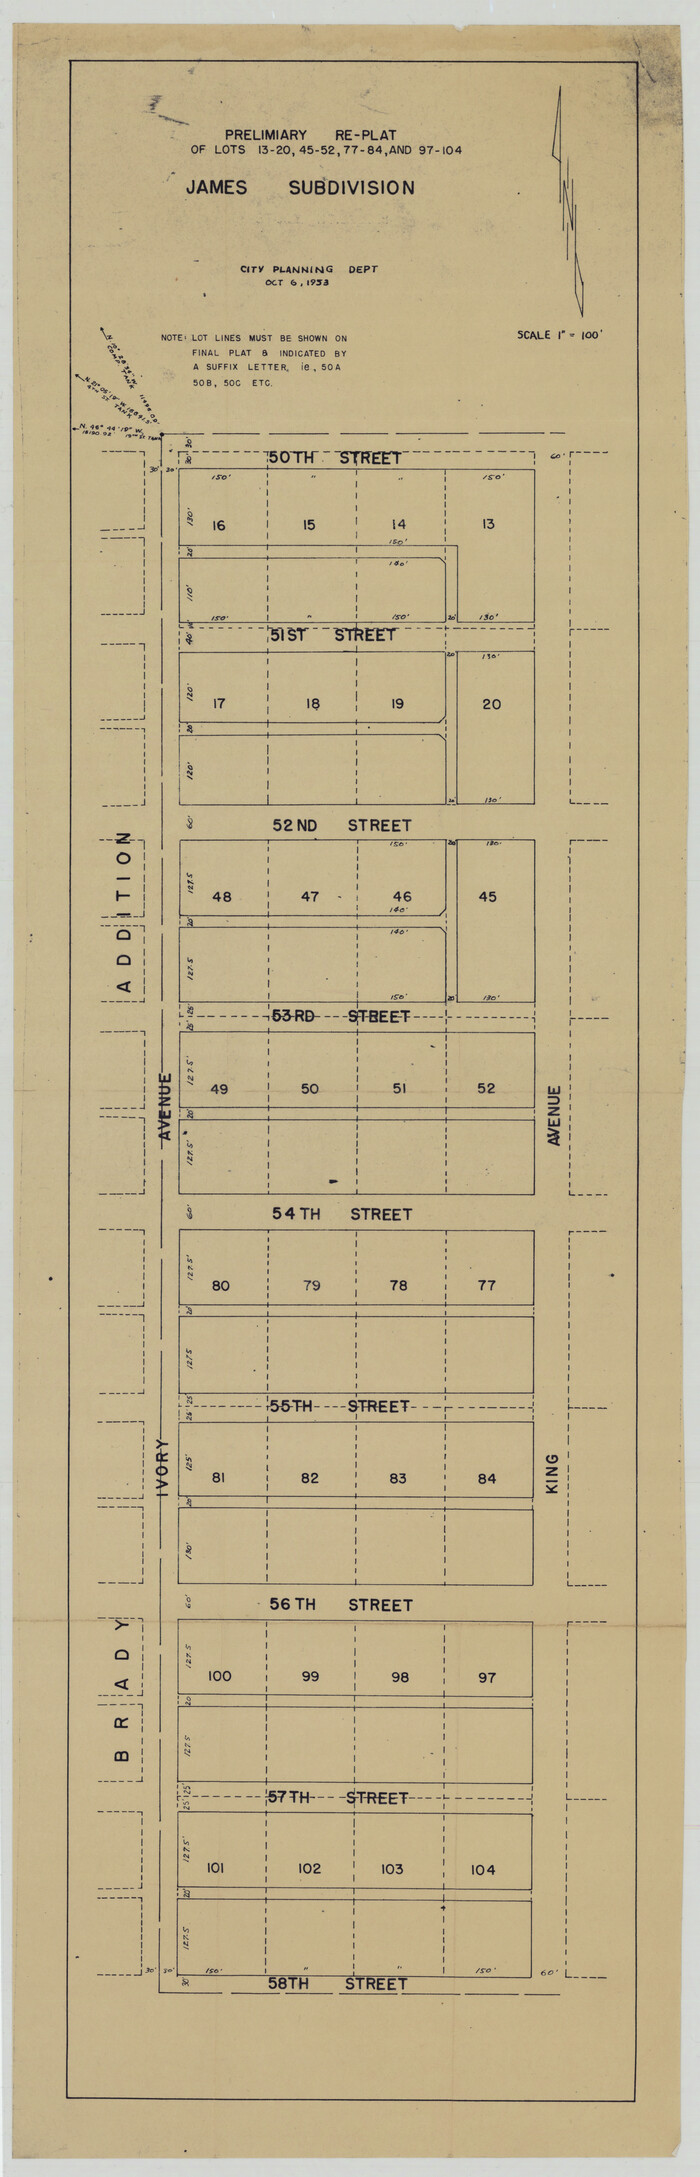 93222, Preliminary Re-Plat of Lots 13-20, 45-52, 77-84, and 97-104 James Subdivision, Twichell Survey Records